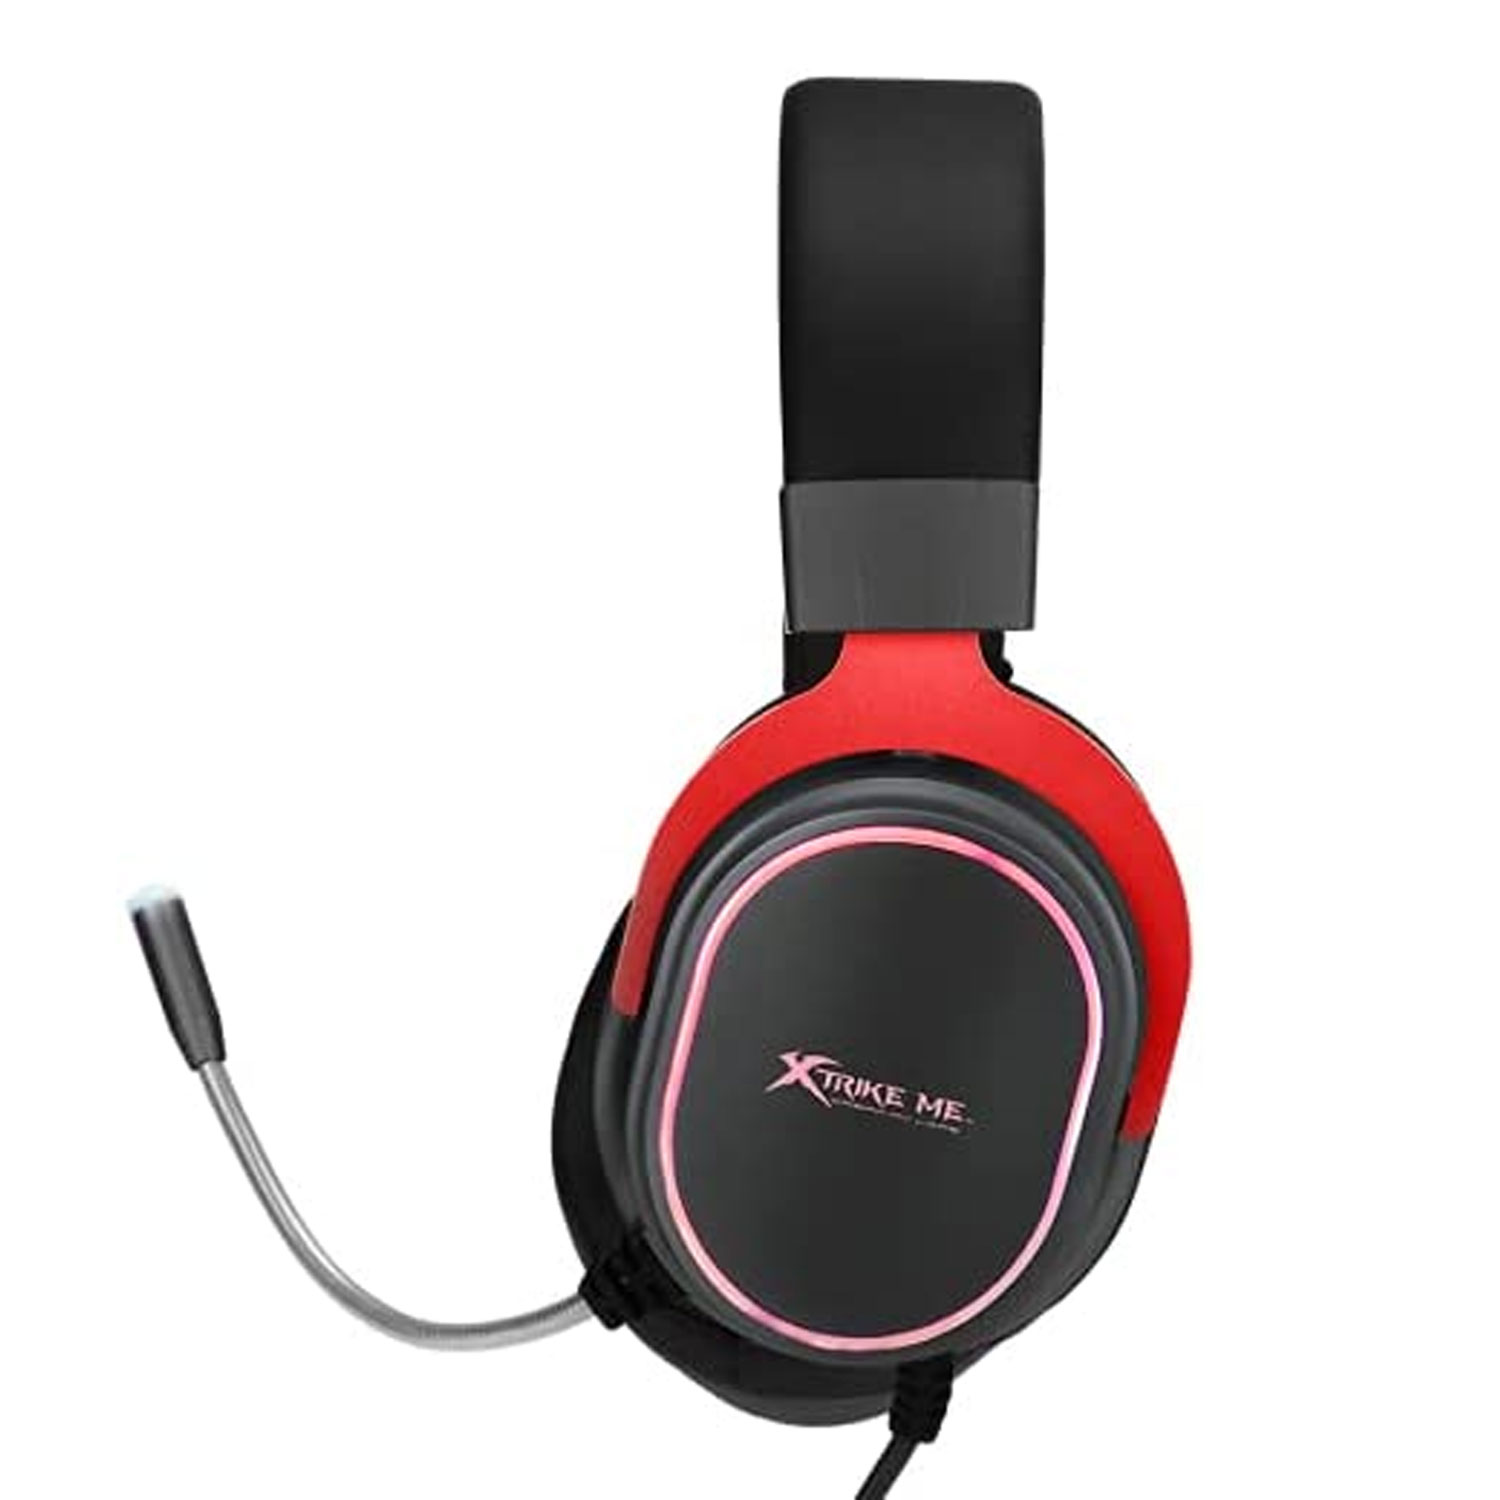 Stereo Gaming Headset, 2.2m Cable